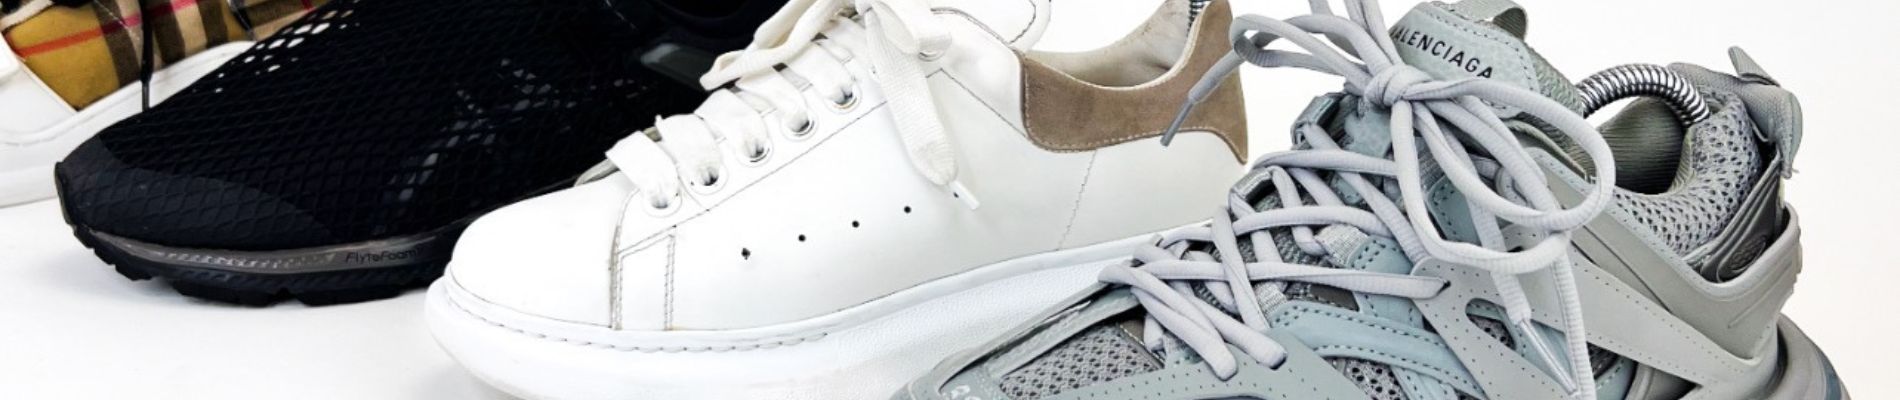 clean your luxury fashion trainers at the handbag clinic